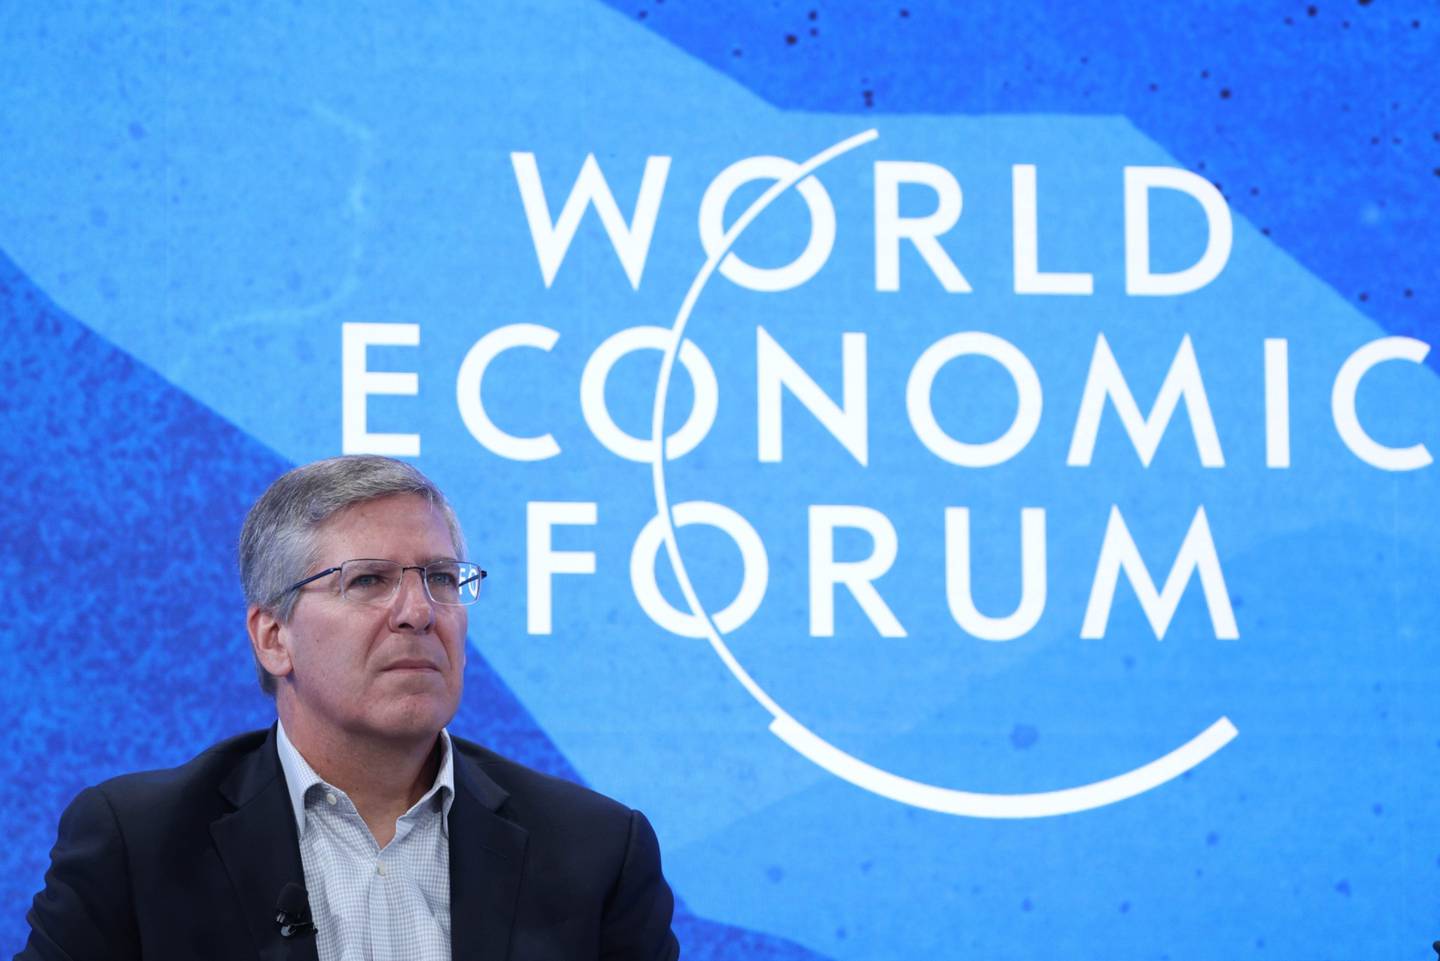 Bob Moritz, global chairman of PWC, during a panel session on the opening day of the World Economic Forum (WEF) in Davos, Switzerland, on Monday, May 23, 2022.  The annual Davos gathering of political leaders, top executives and celebrities runs from May 22 to 26. Photographer: Hollie Adams / Bloomberg